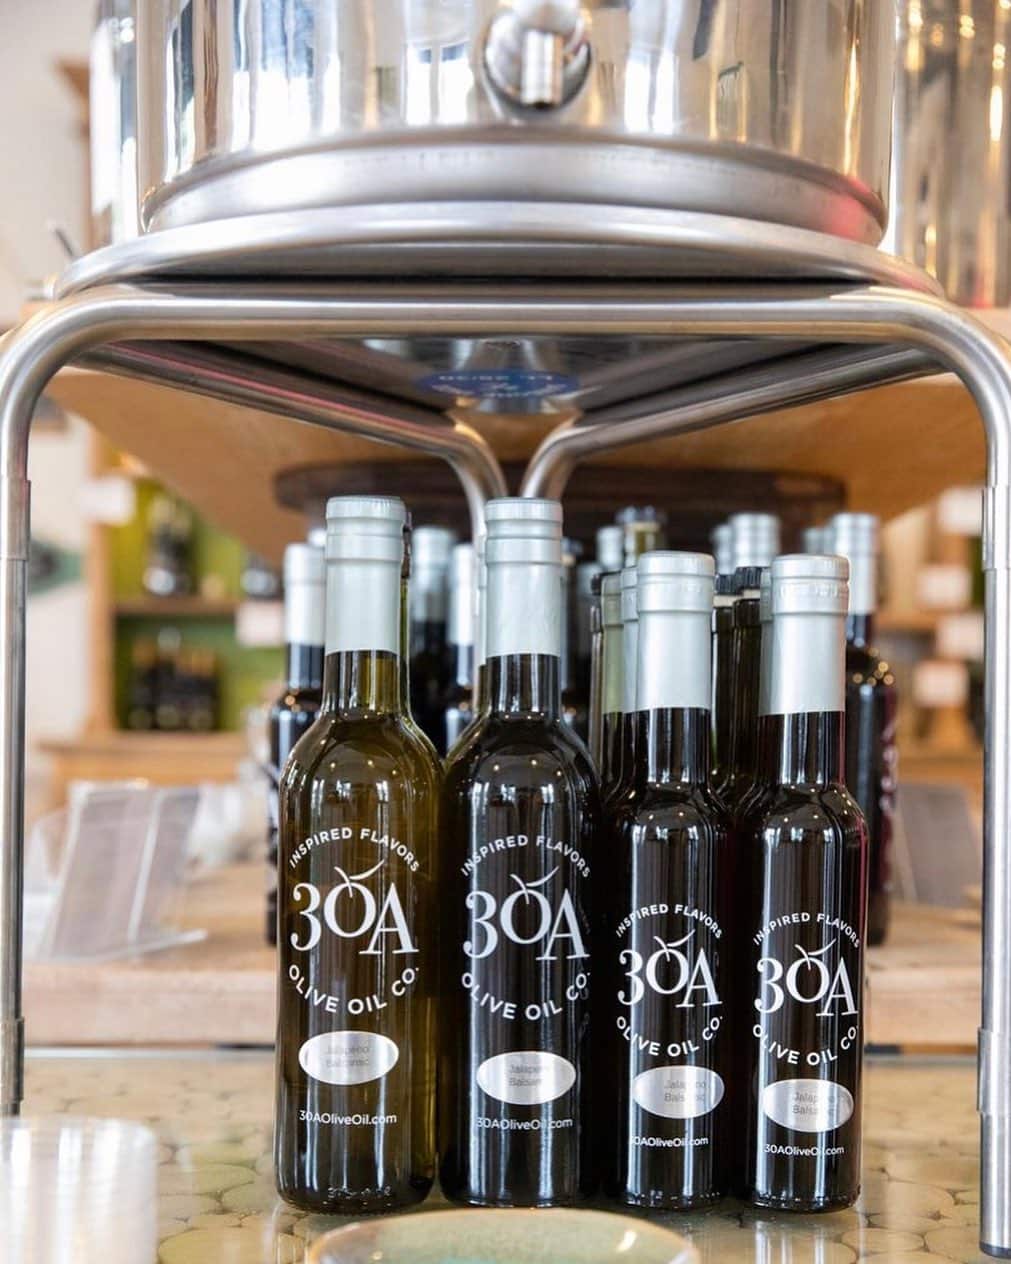 30A Olive Oil, 30avenue